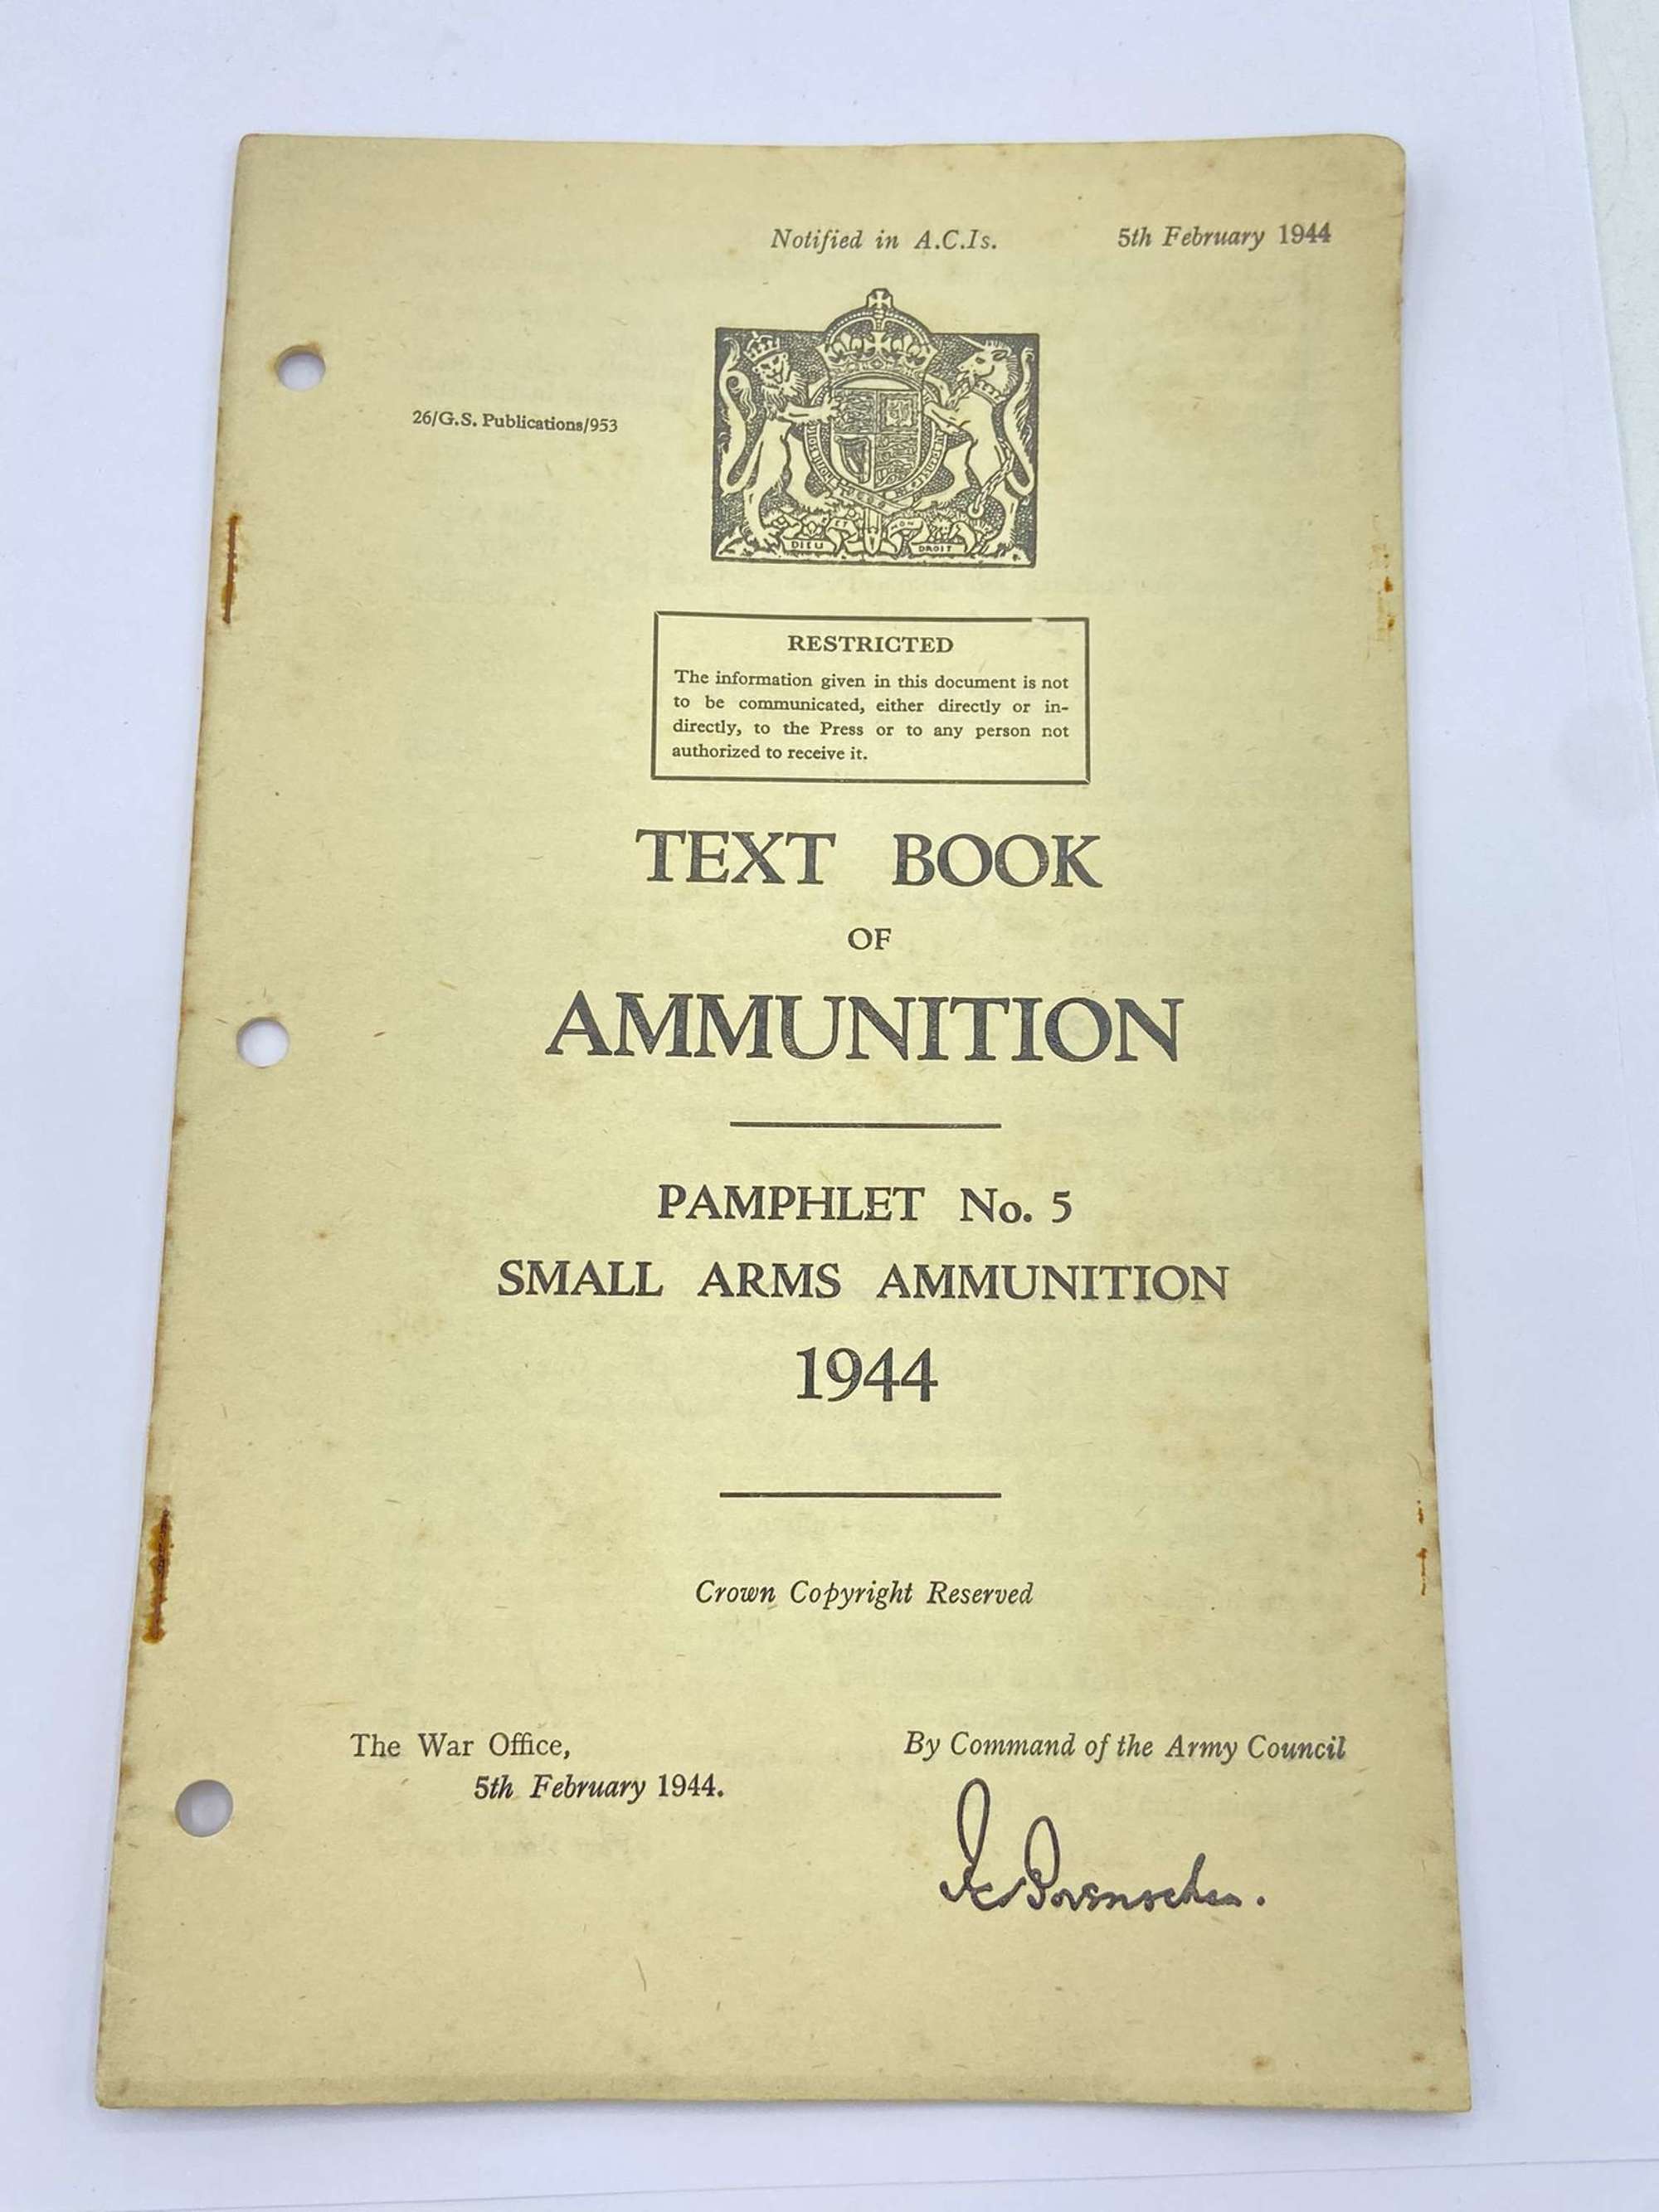 WW2 British Text Book Of Ammunition Pamphlet No.5 Small Arms Ammo 1944